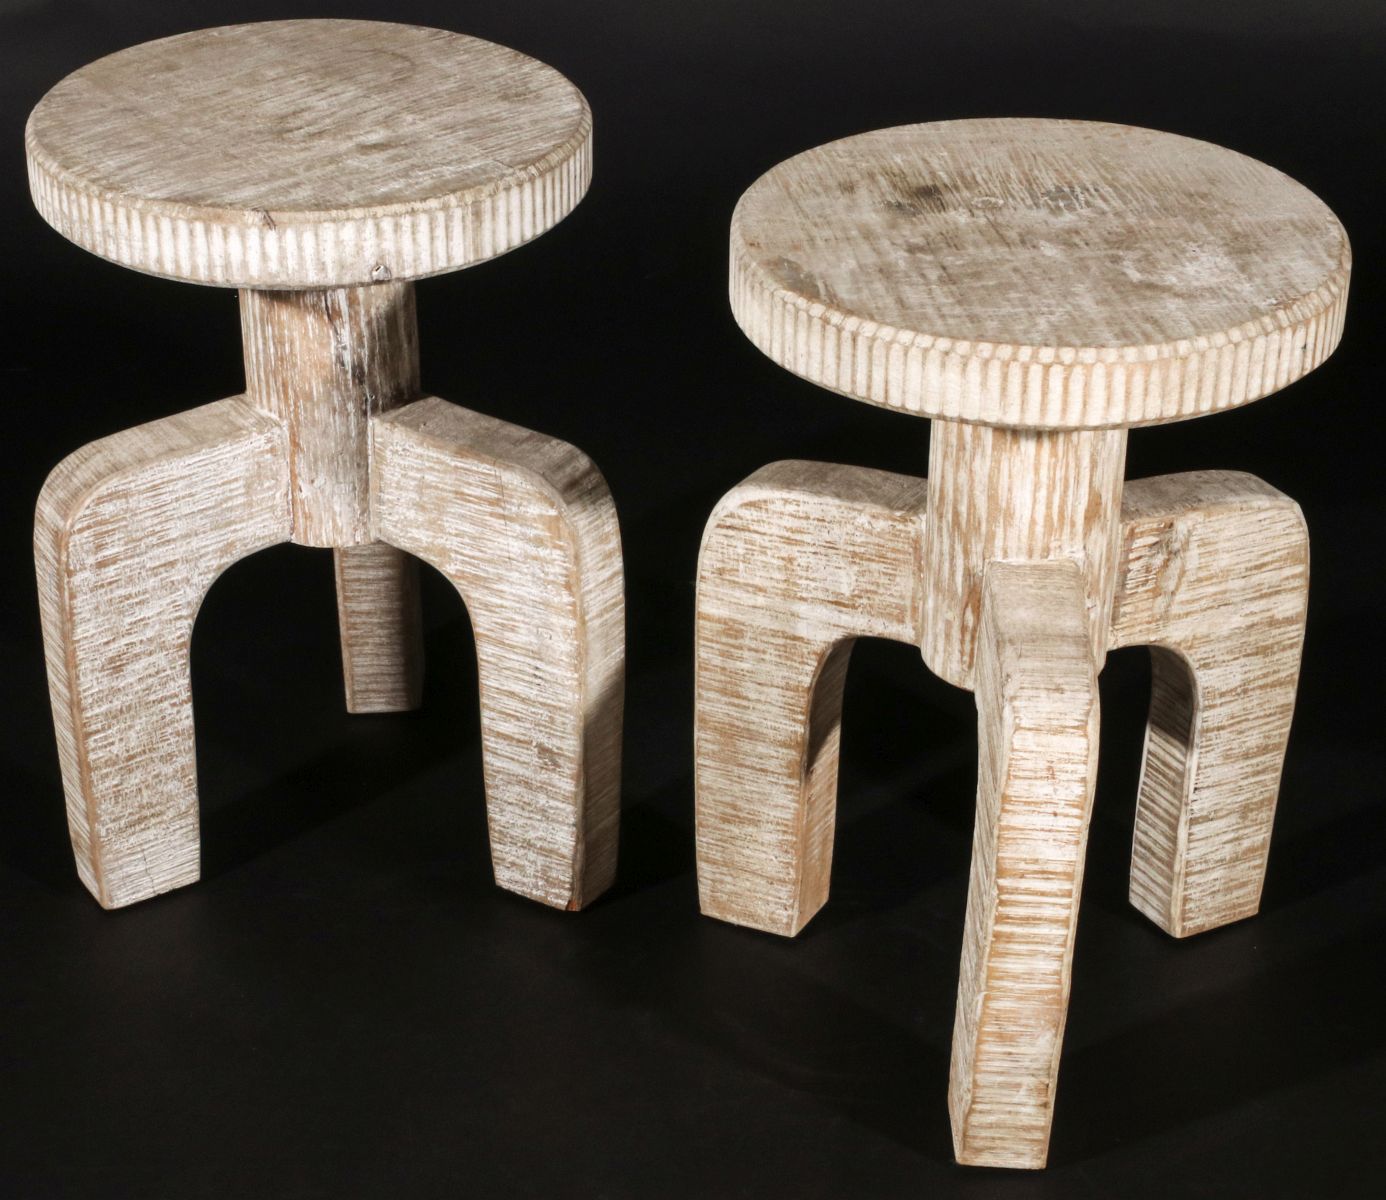 INTERESTING PAIR OF CARVED AND PICKLED WOOD STOOLS